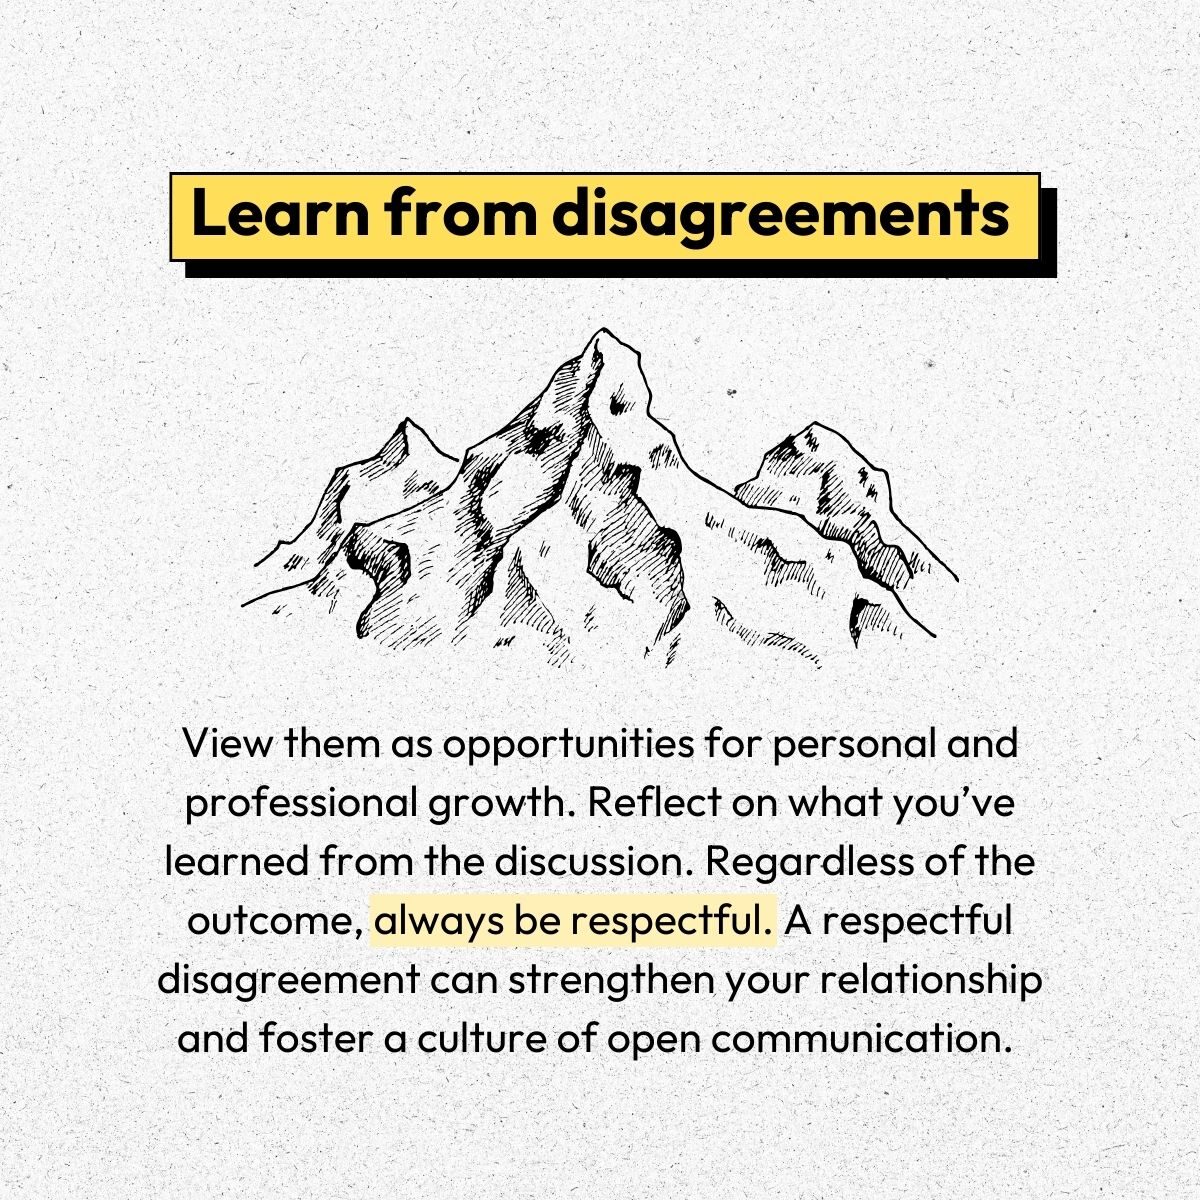 Learn from past disagreements and grow your career